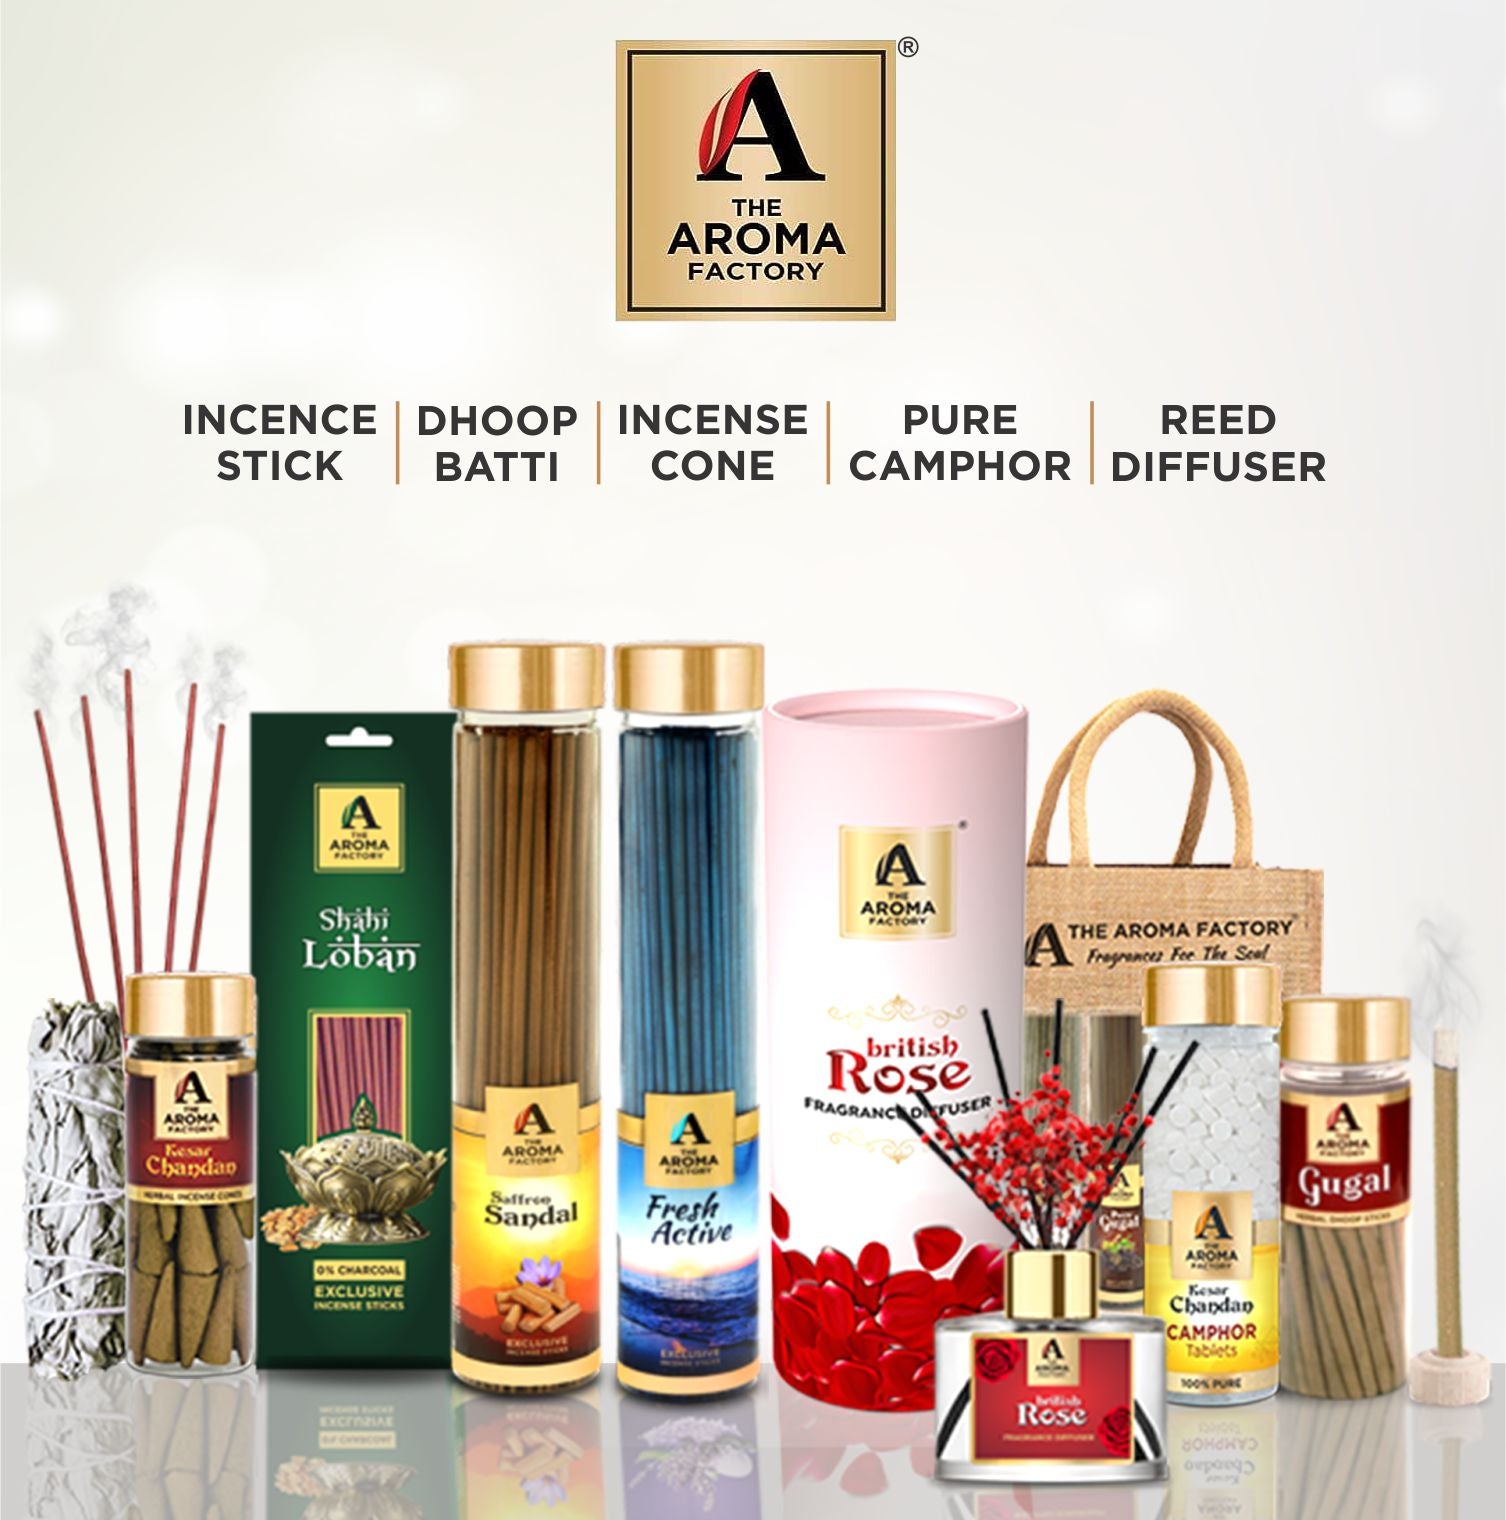 The Aroma Factory Happy Birthday Bhabhi Gift with Card, Fresh Active Fragrance Reed Diffuser Set (1 Box + 1 Card)